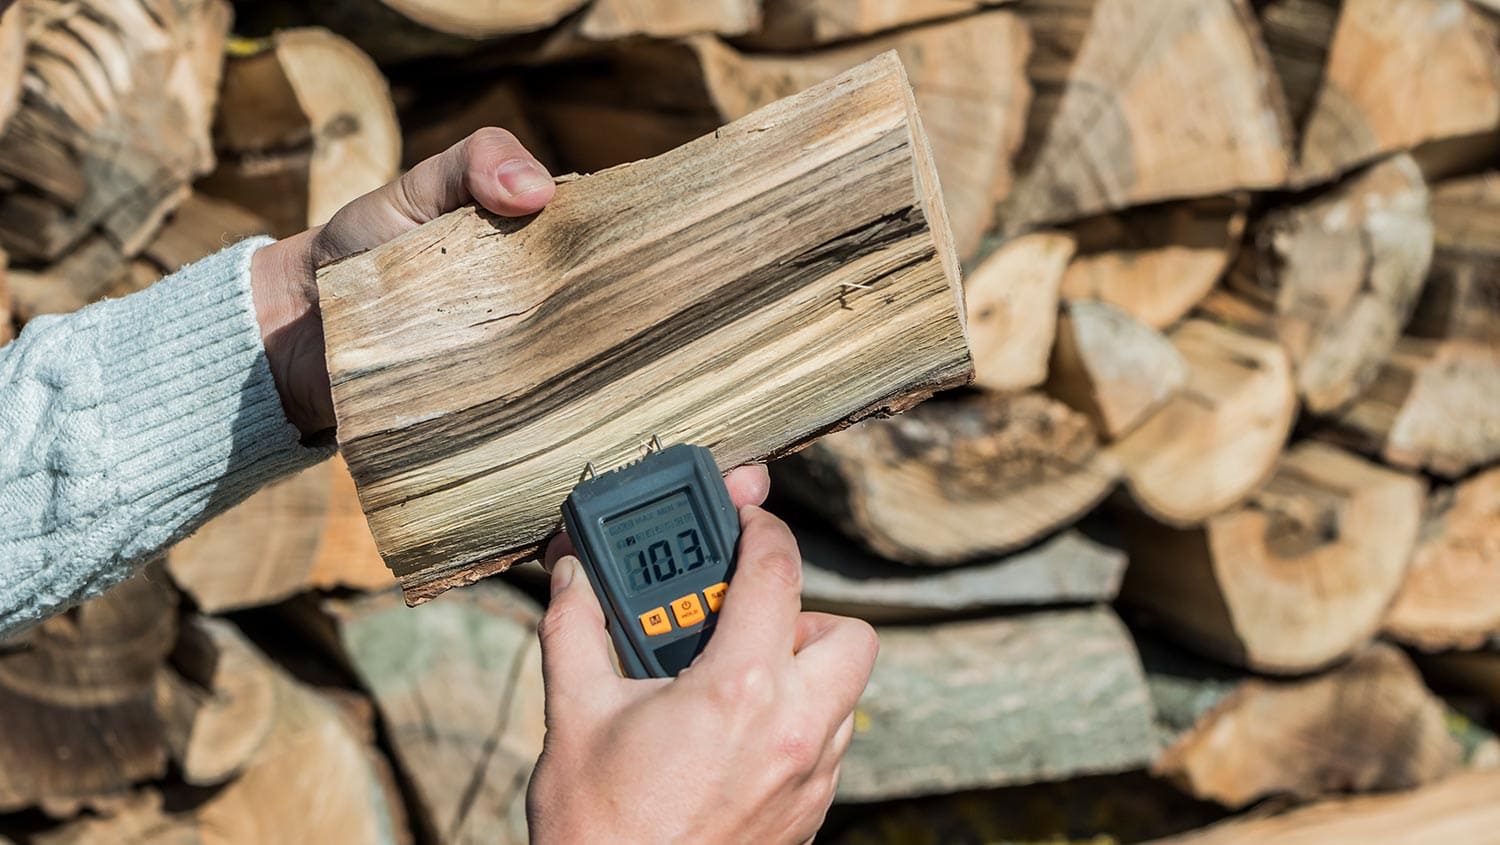 A man measures the humidity of firewood with a moisture meter